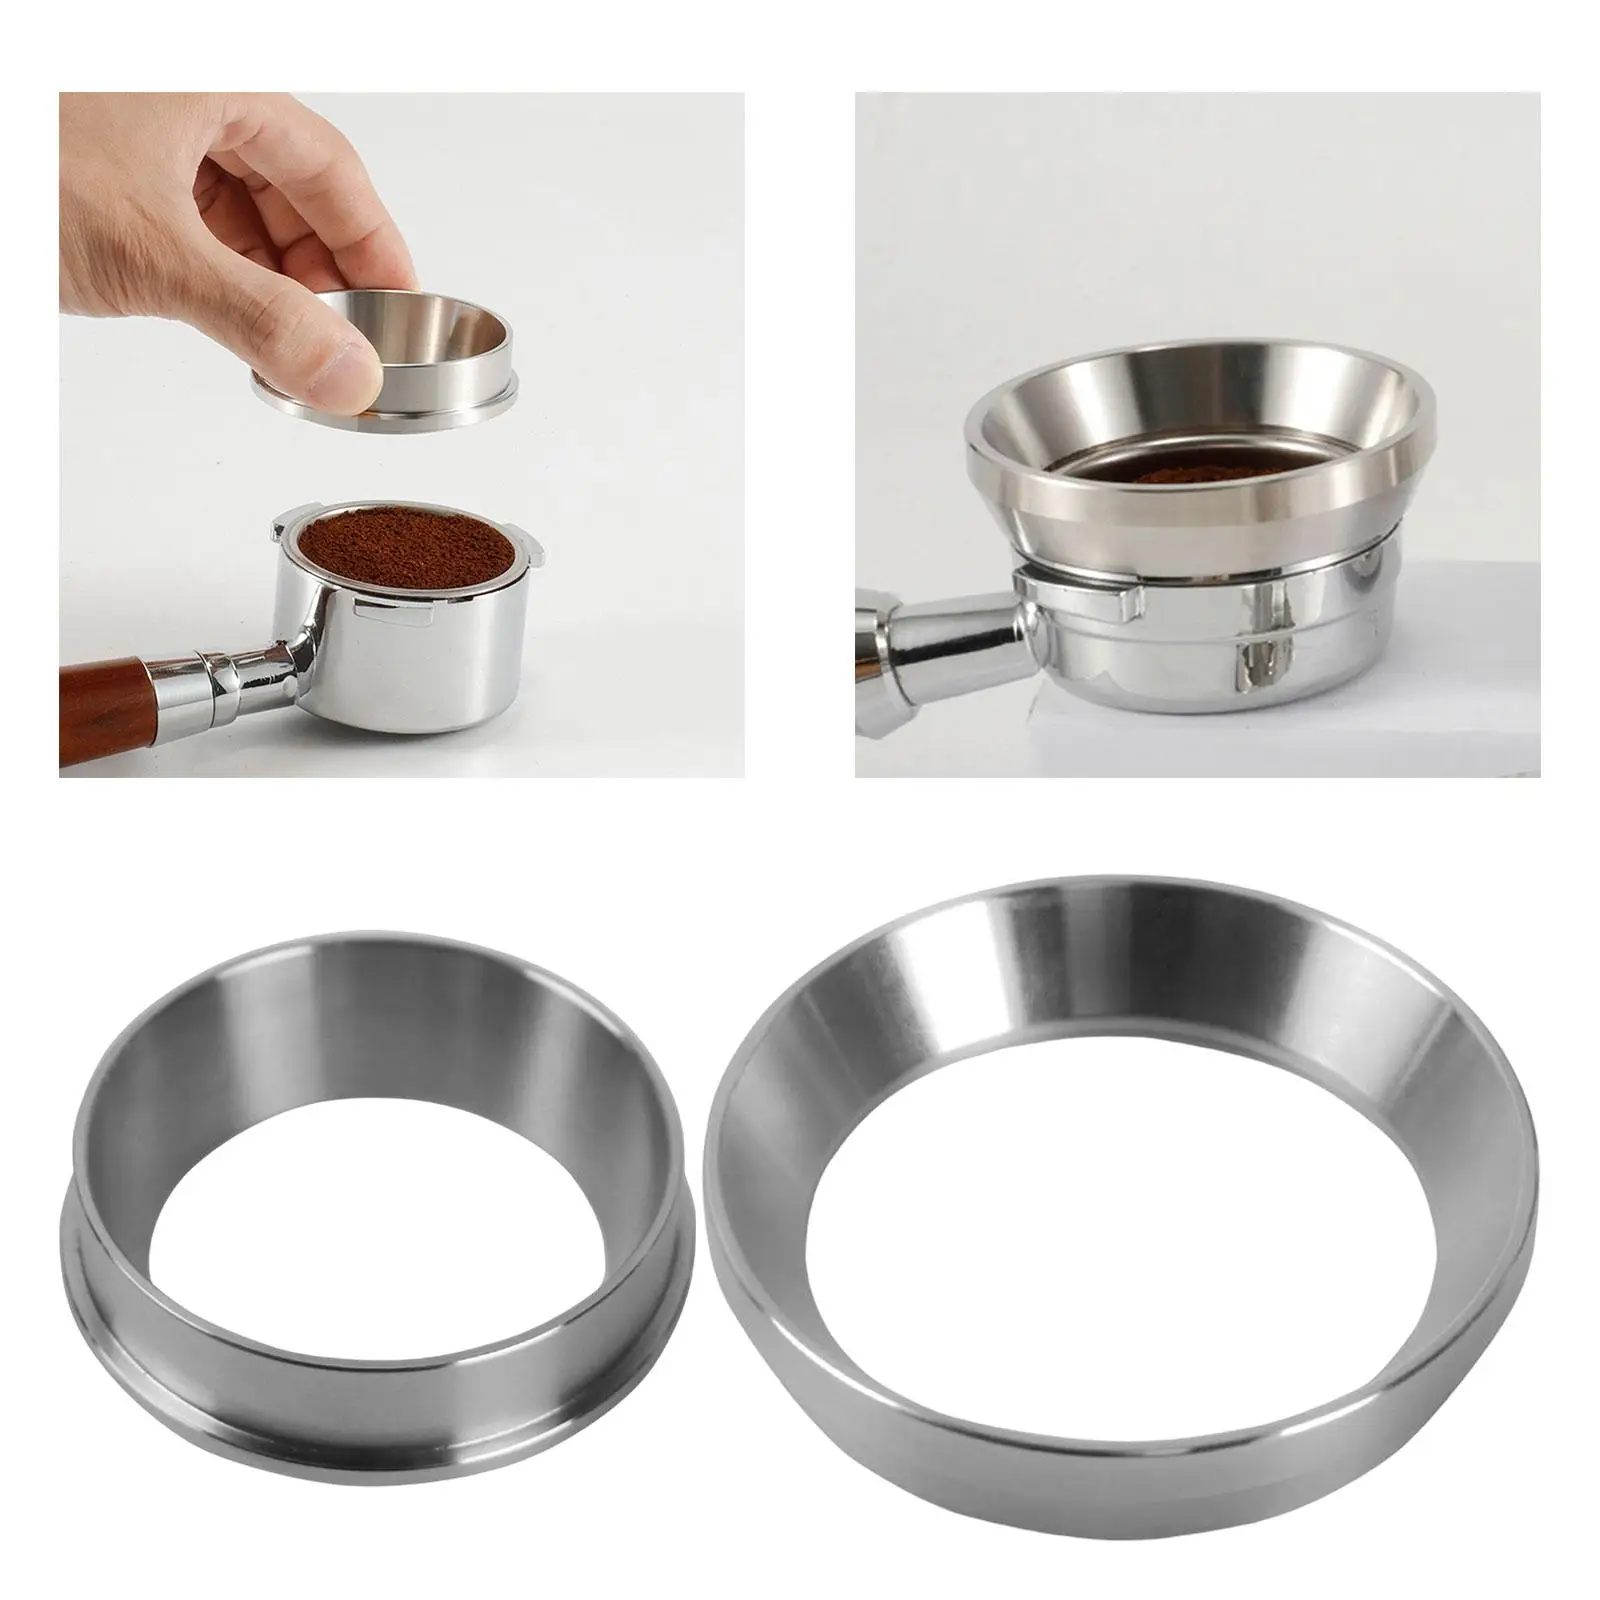 Coffee Dosing Ring Stainless Steel Lightweight for Most Coffee Machine Handles Easily Install Durable Coffee Maker Accessory